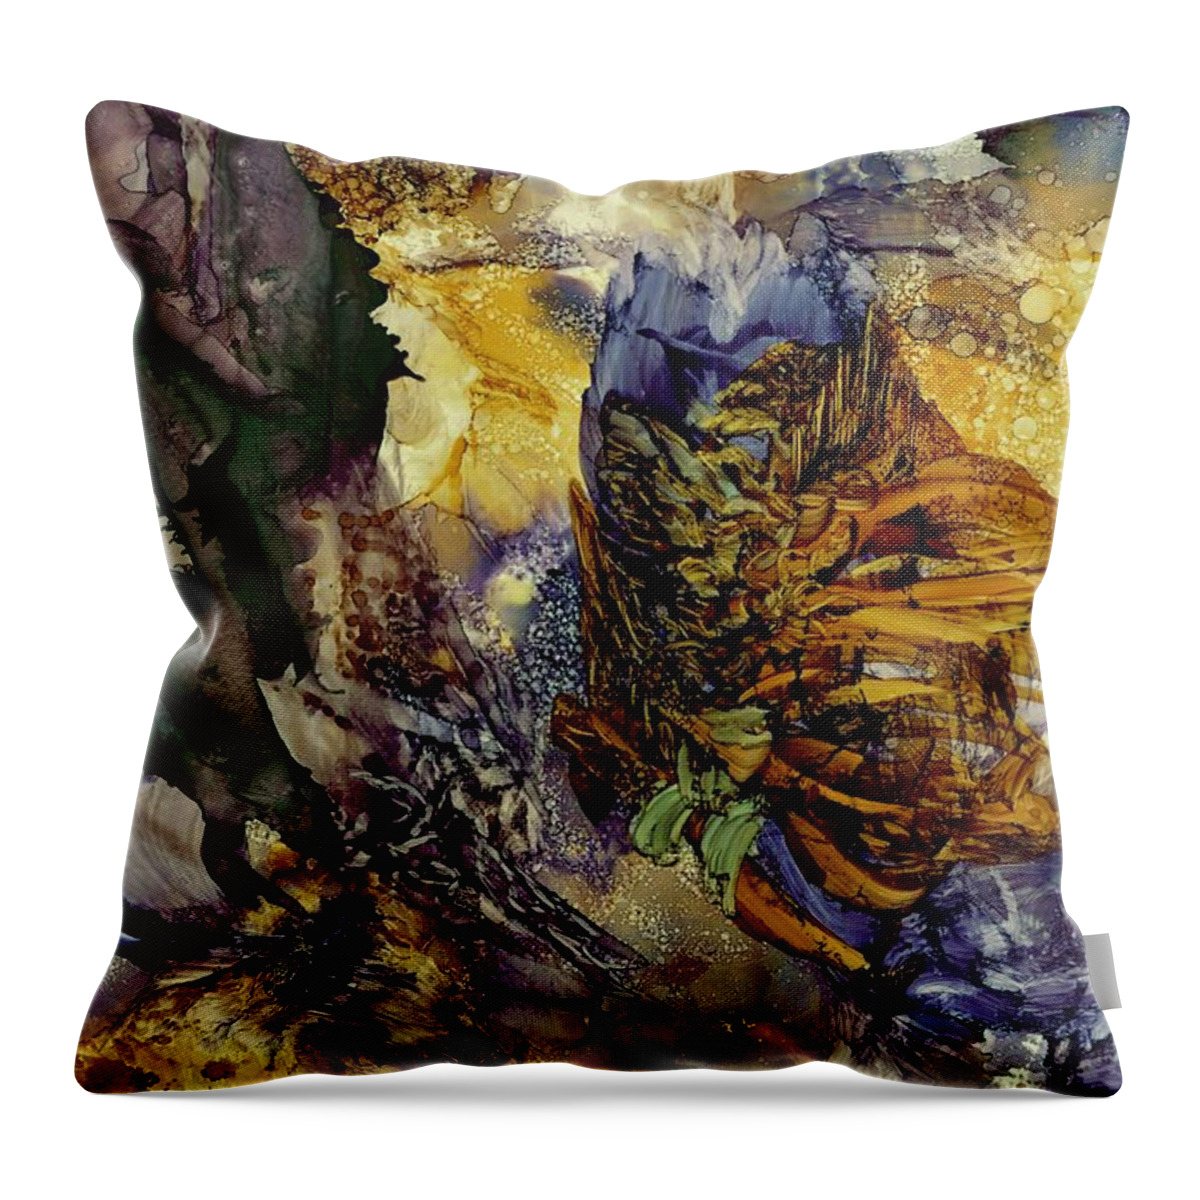 Flow Throw Pillow featuring the painting Re-emergence by Angela Marinari